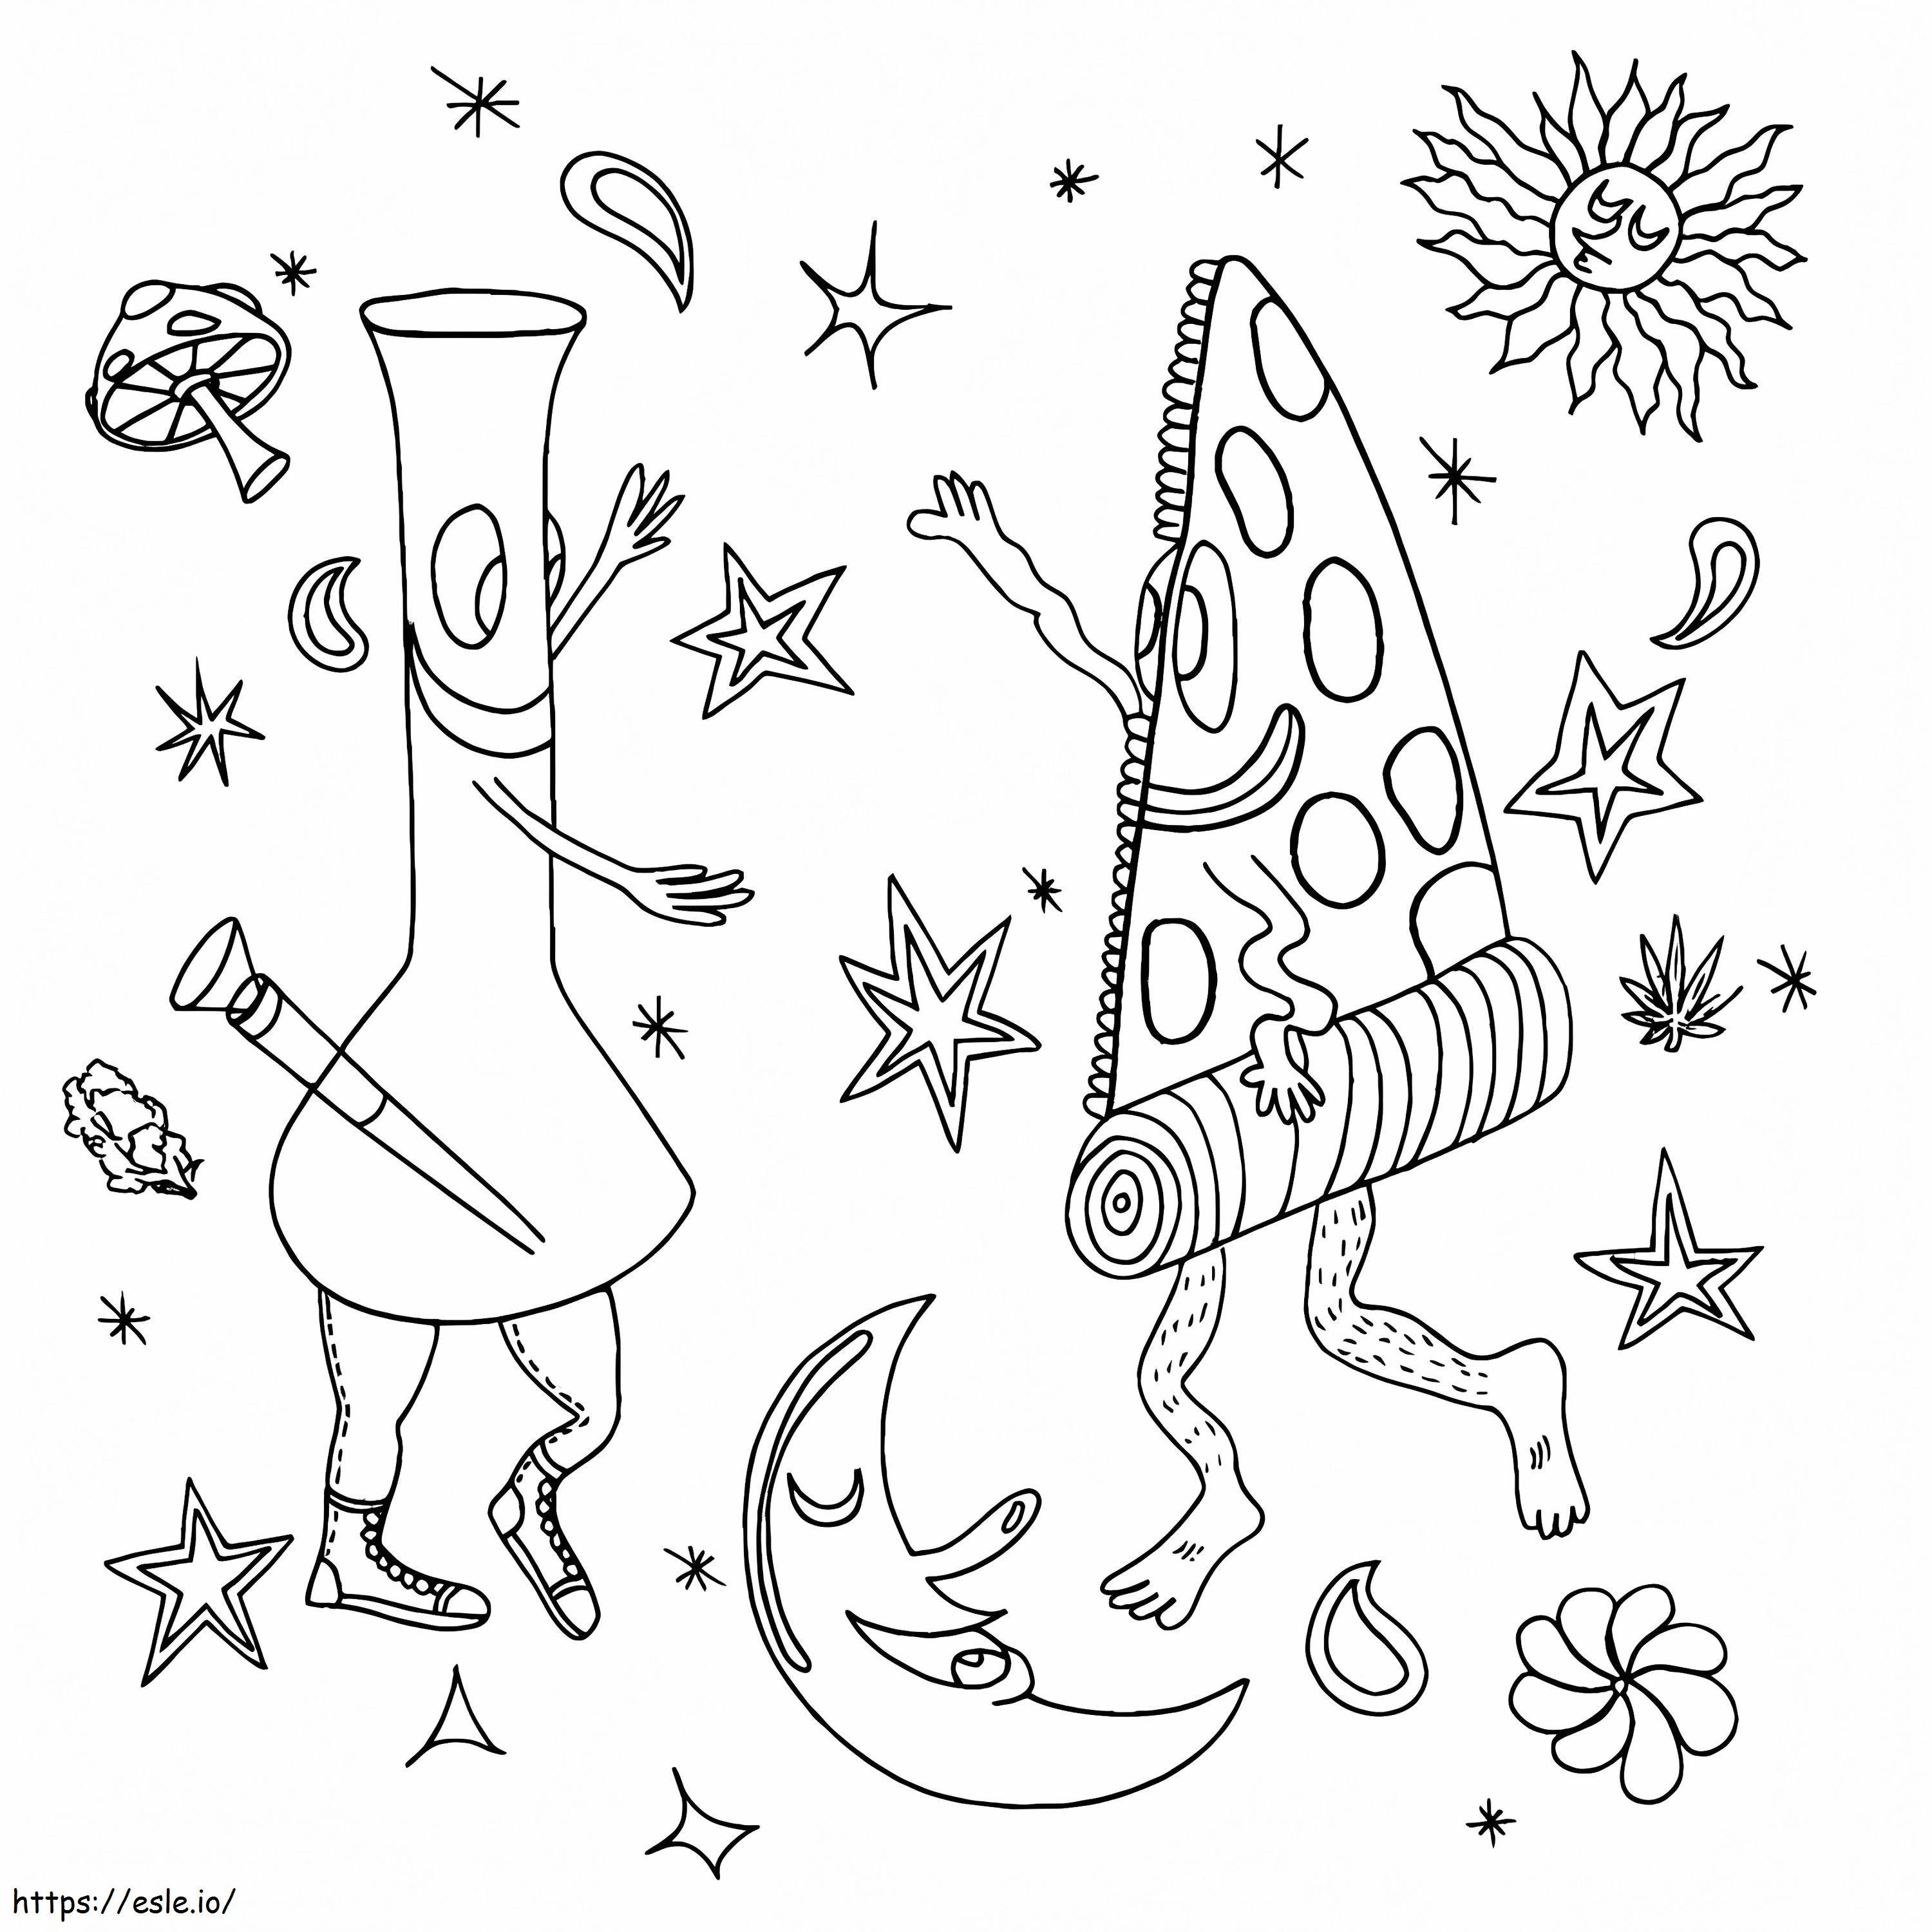 Stoner 11 coloring page